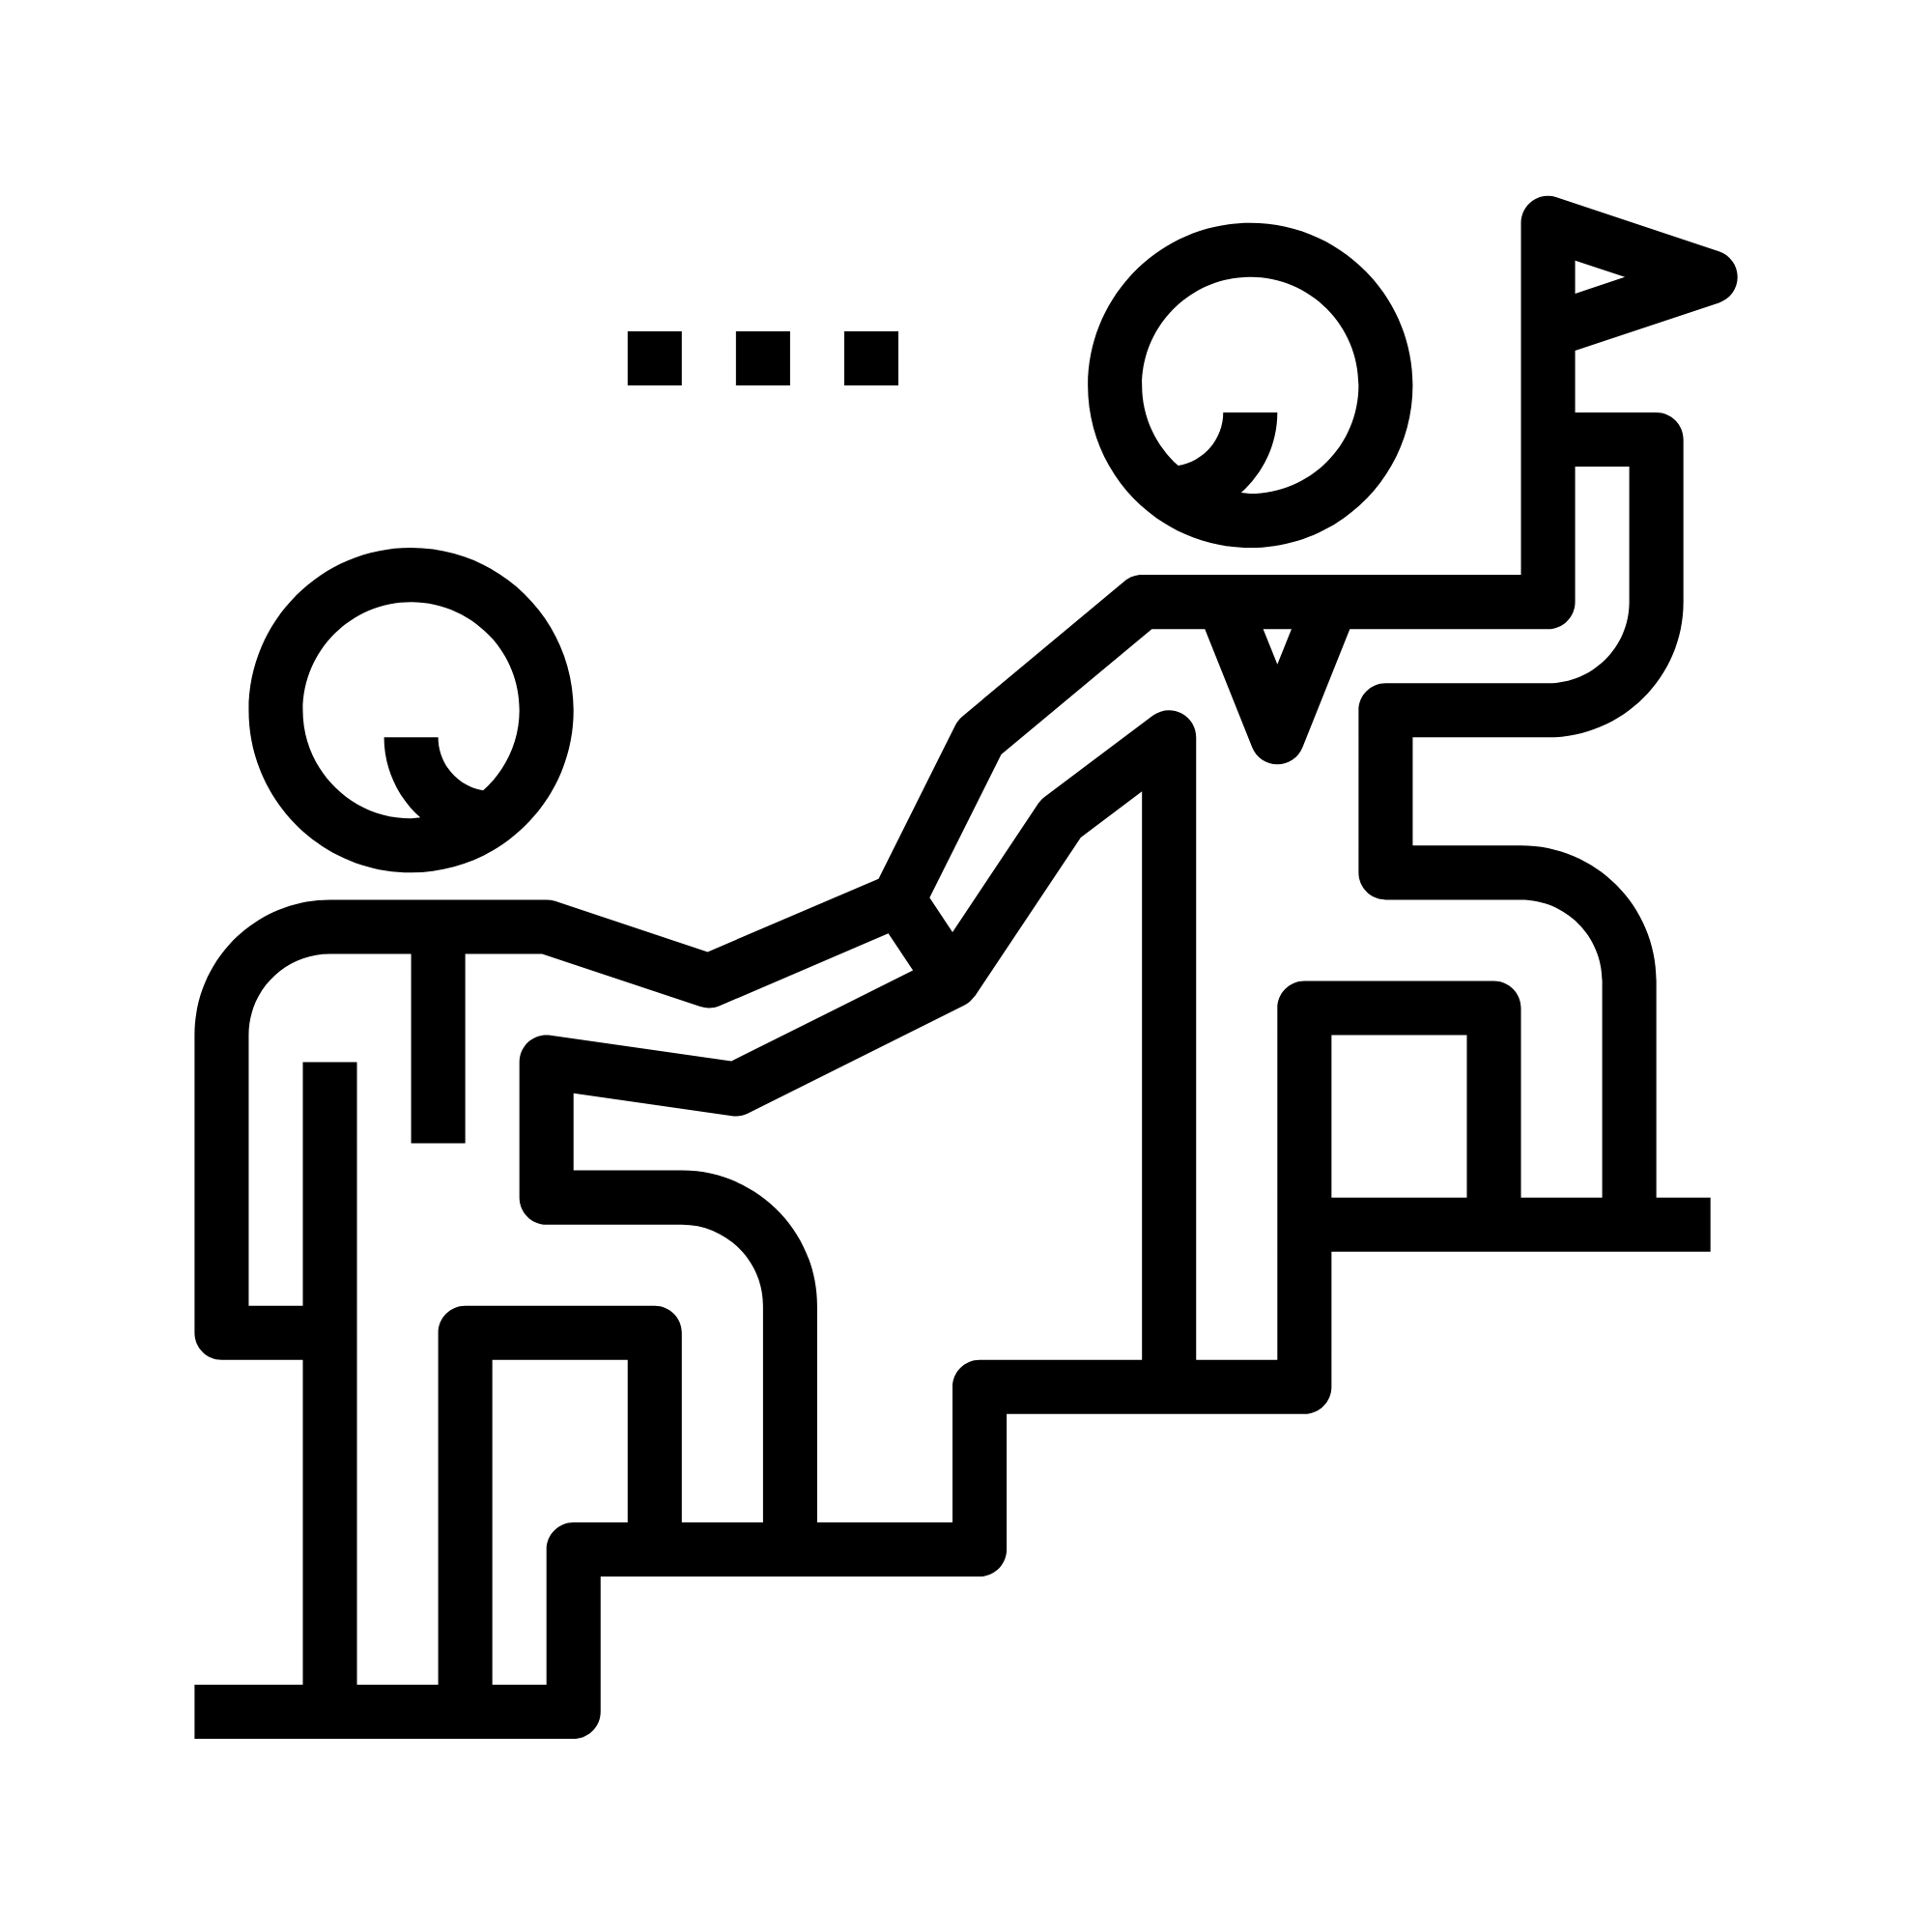 An icon of two men ascending a set of stairs, symbolising their journey towards personal growth and success under the IMDA's AIM Programme